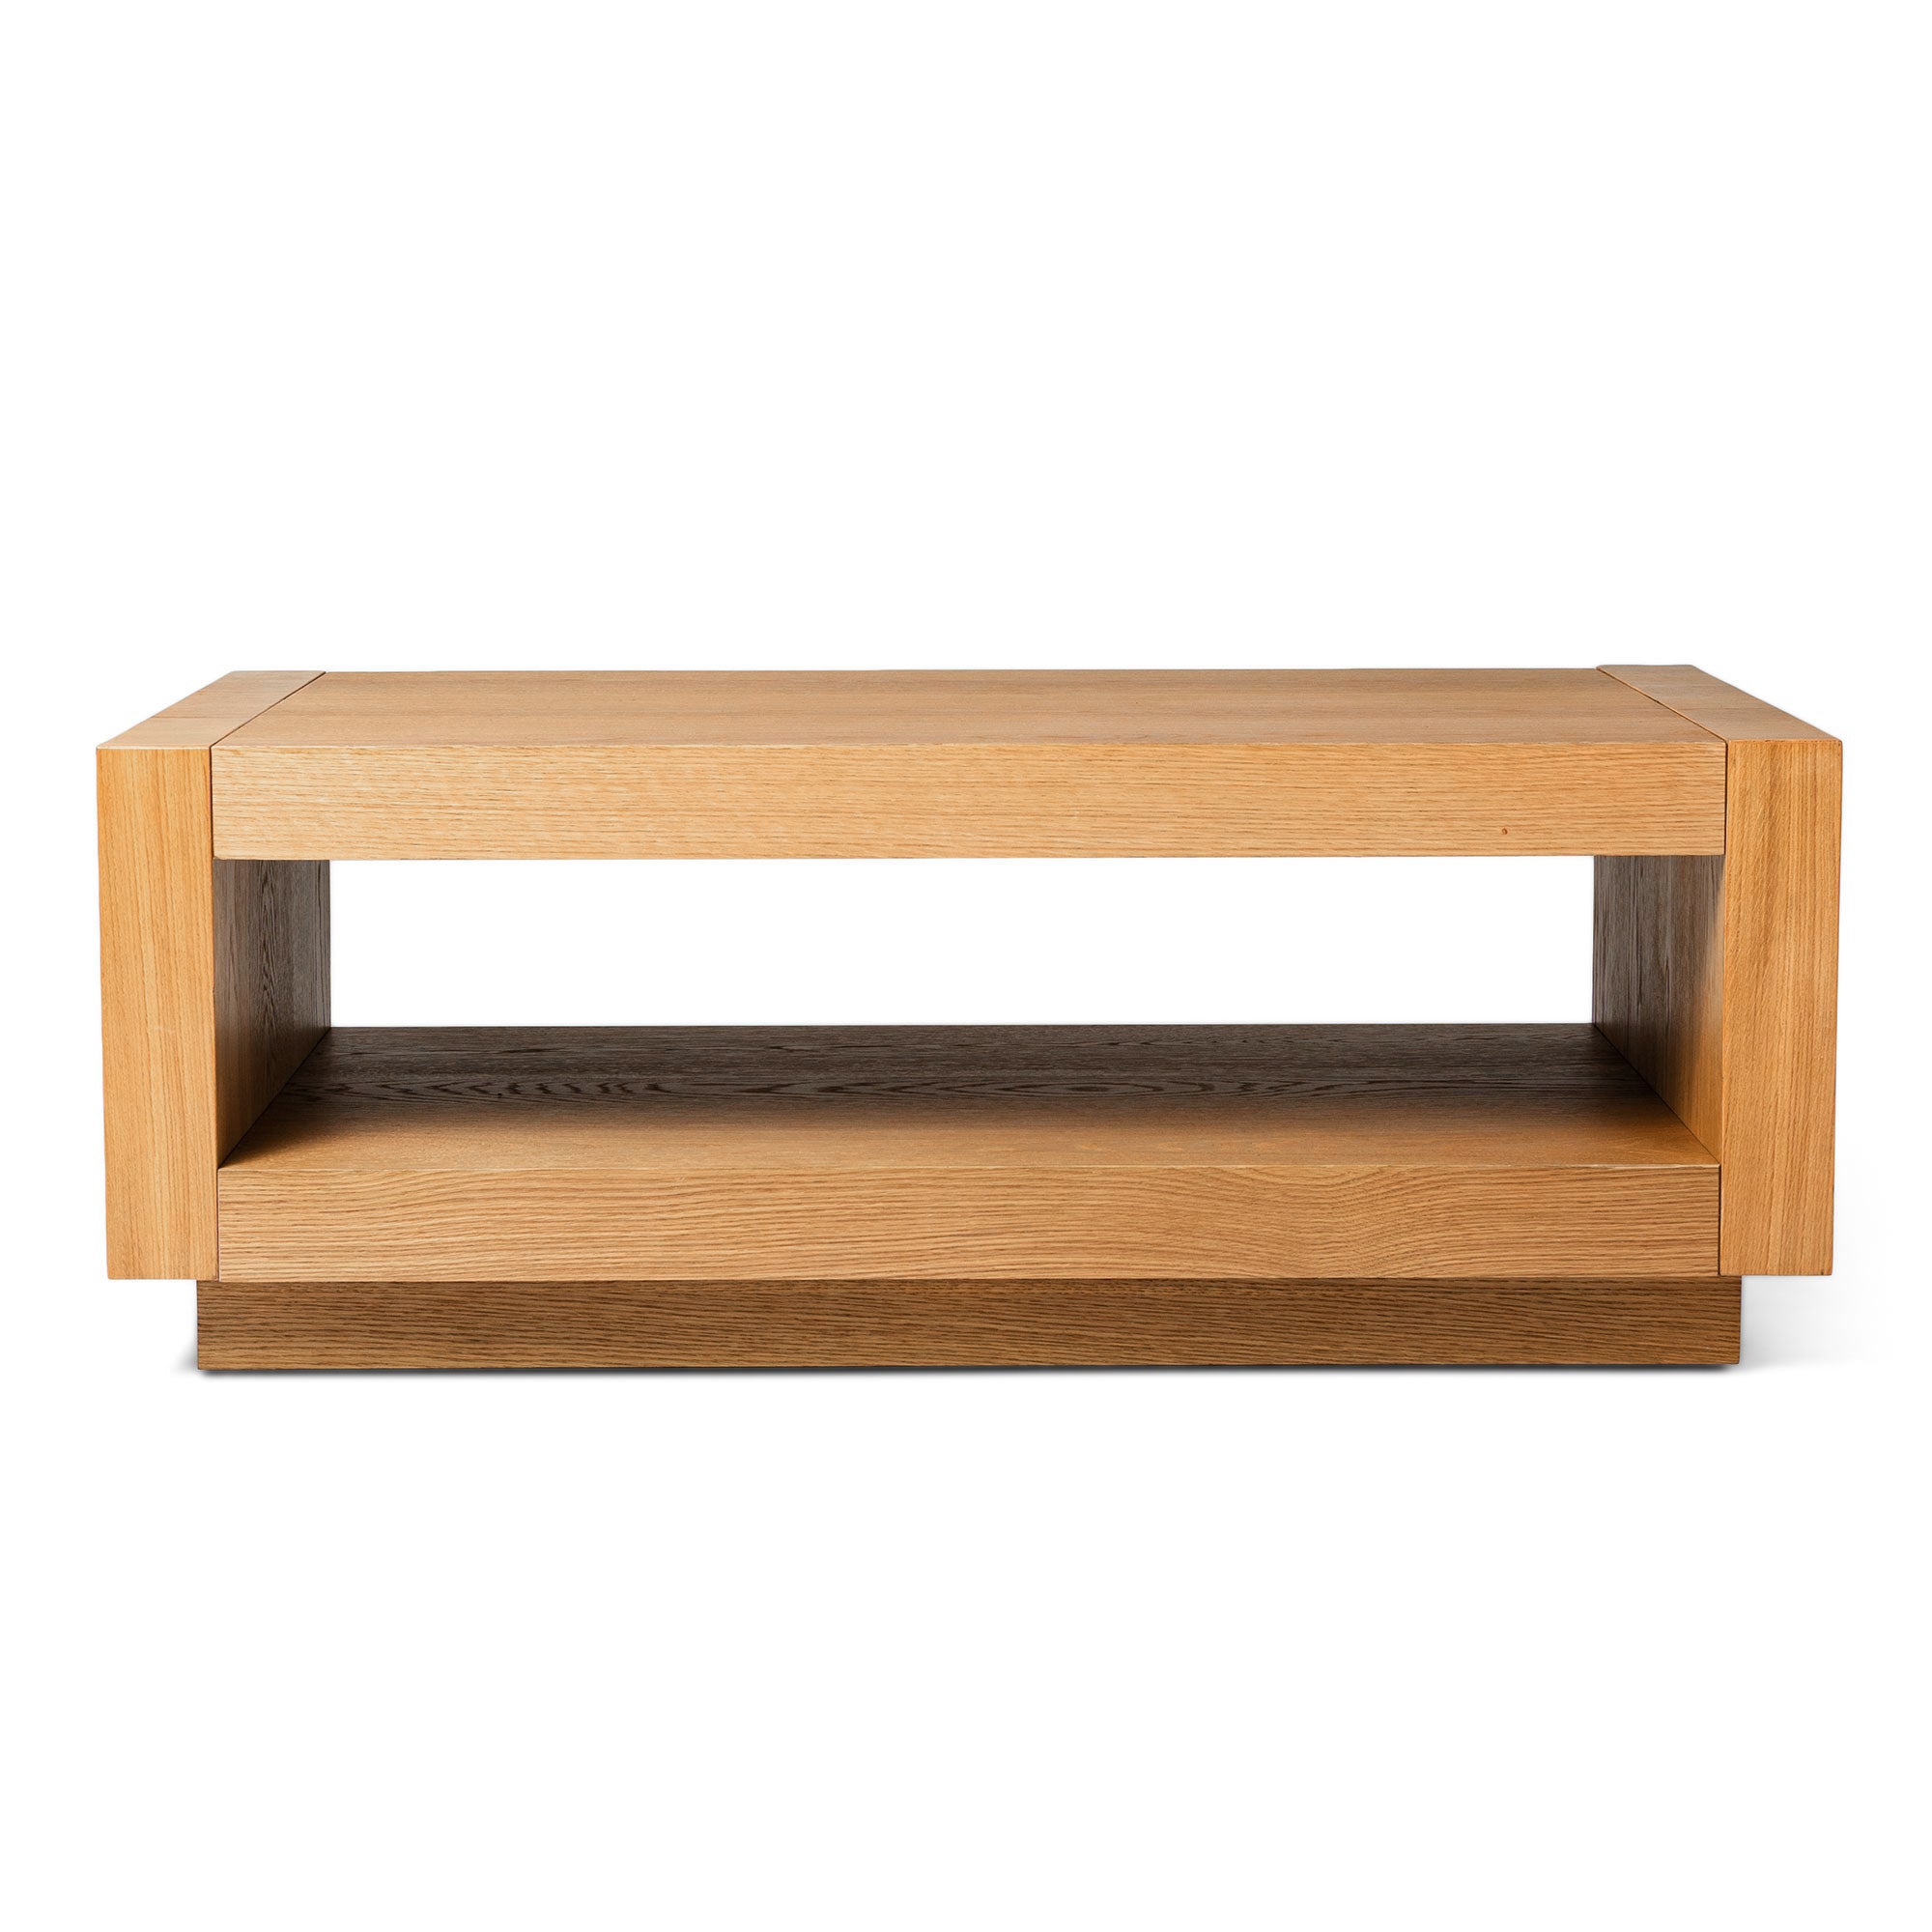 Artemis Contemporary Wooden Coffee Table in Refined Natural Finish